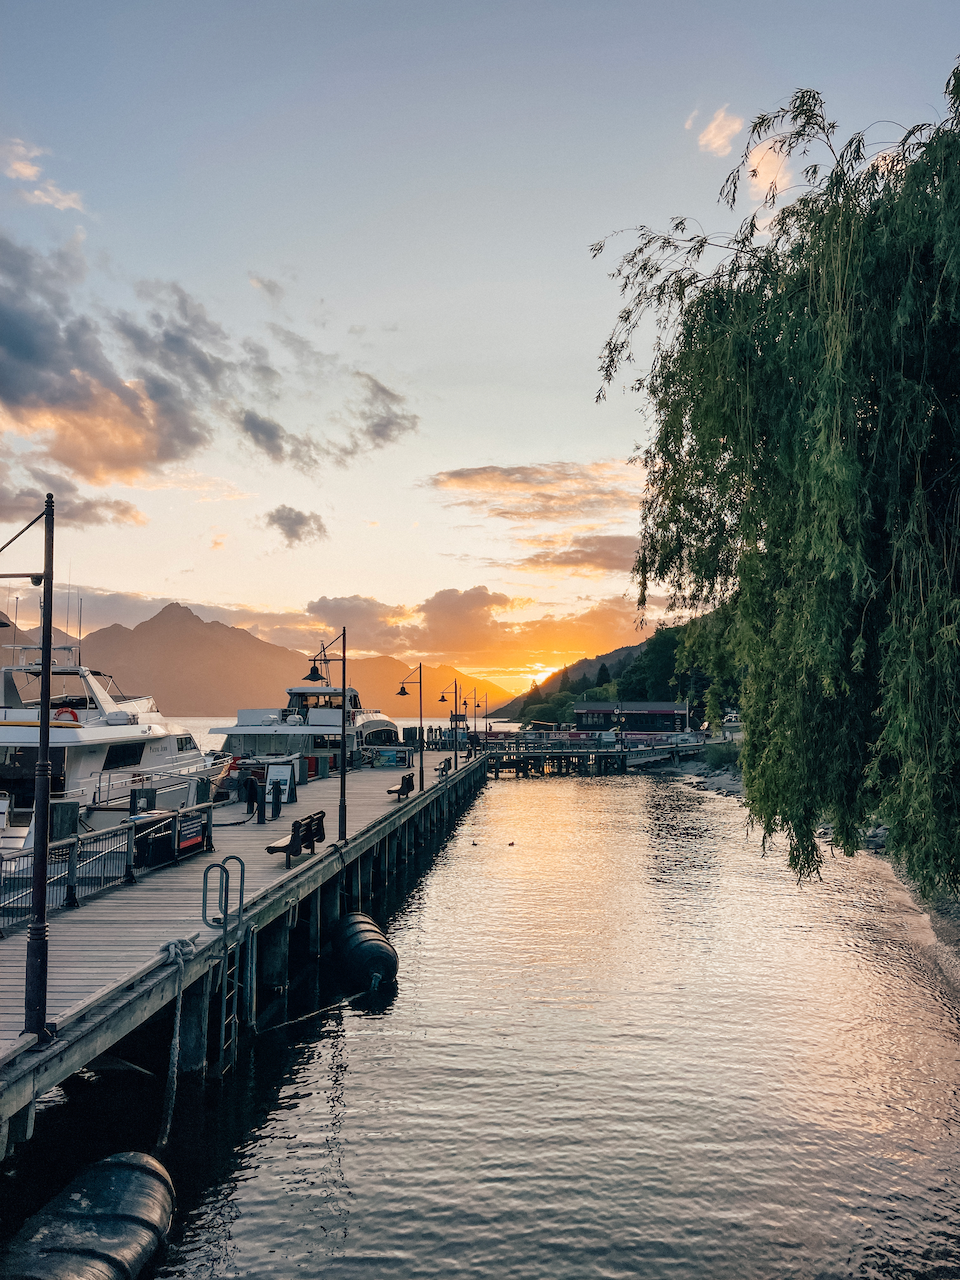 The boats docked at the wharf - Queenstown - New Zealand